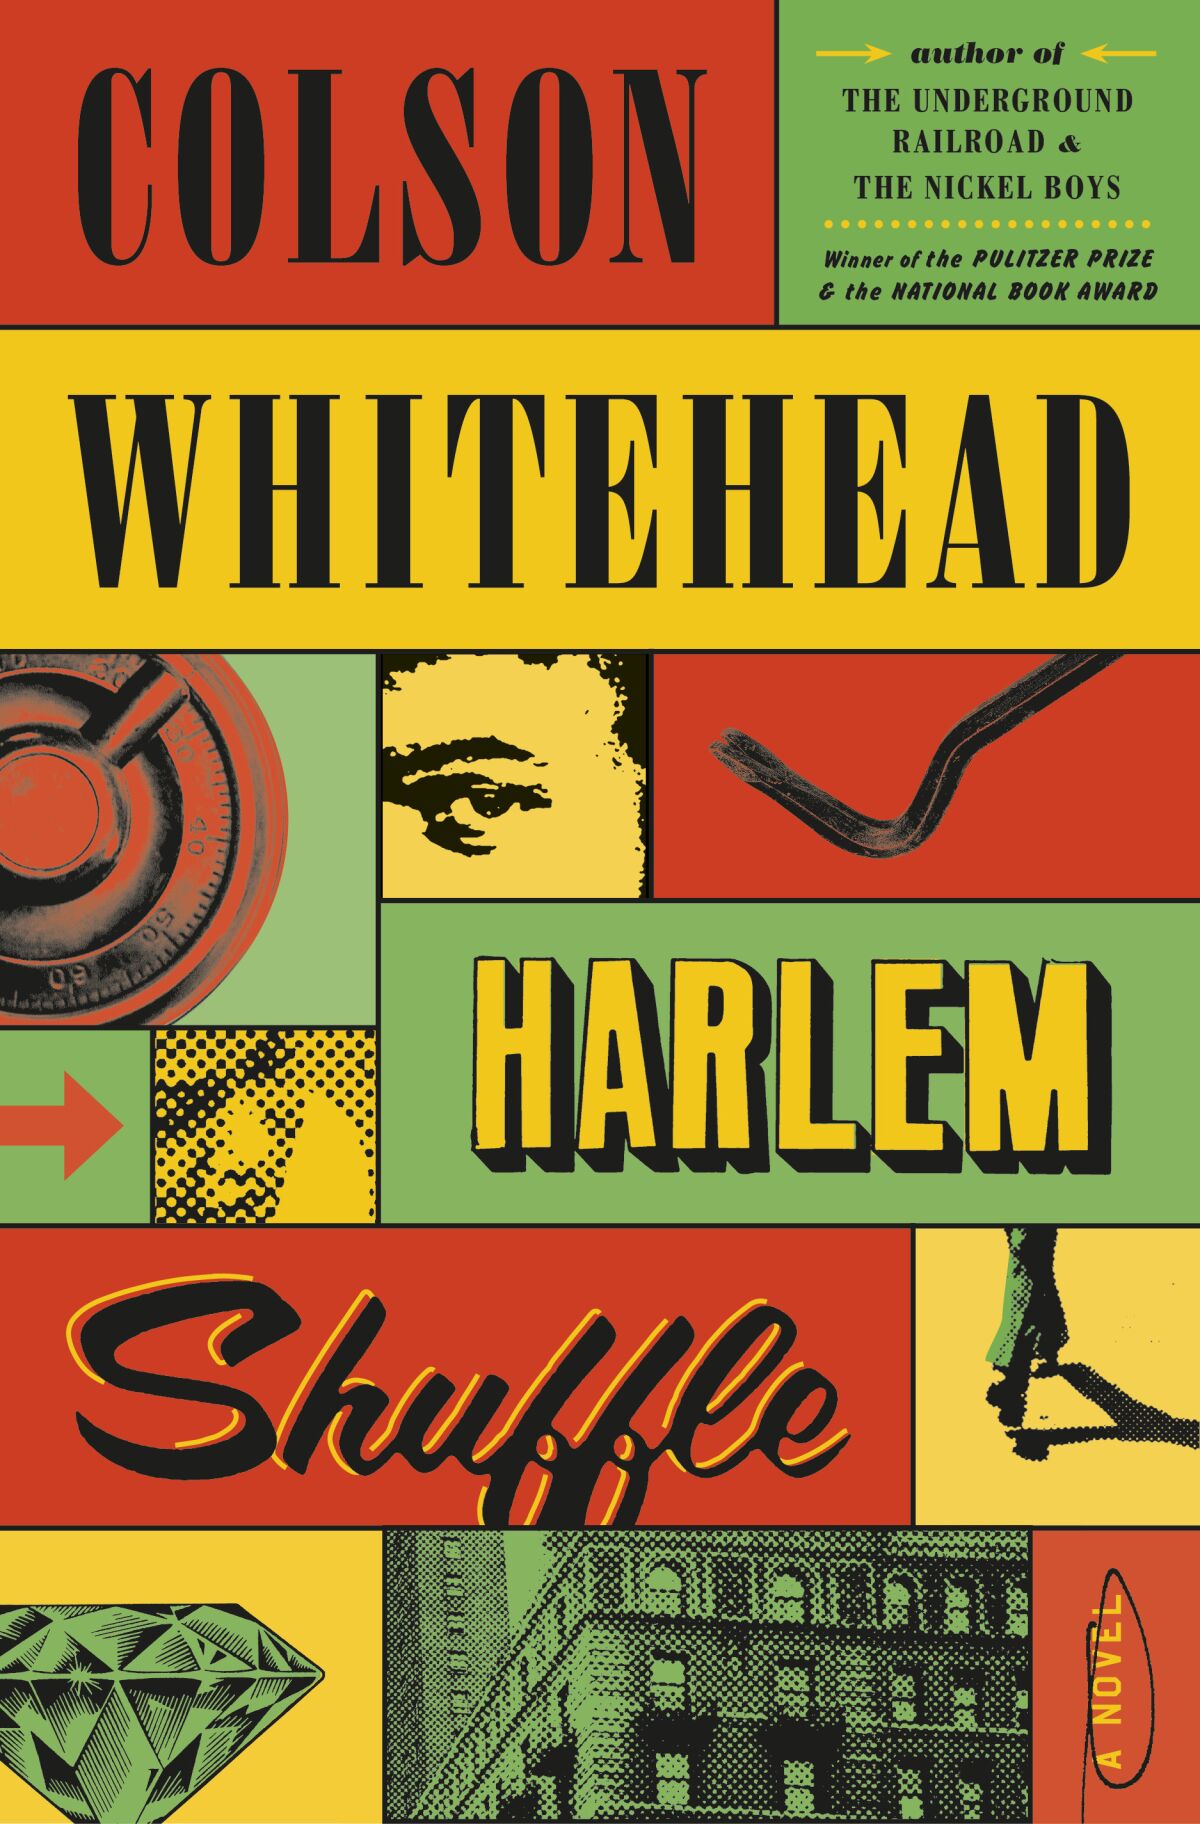 Book cover of "Harlem Shuffle" by Colson Whitehead